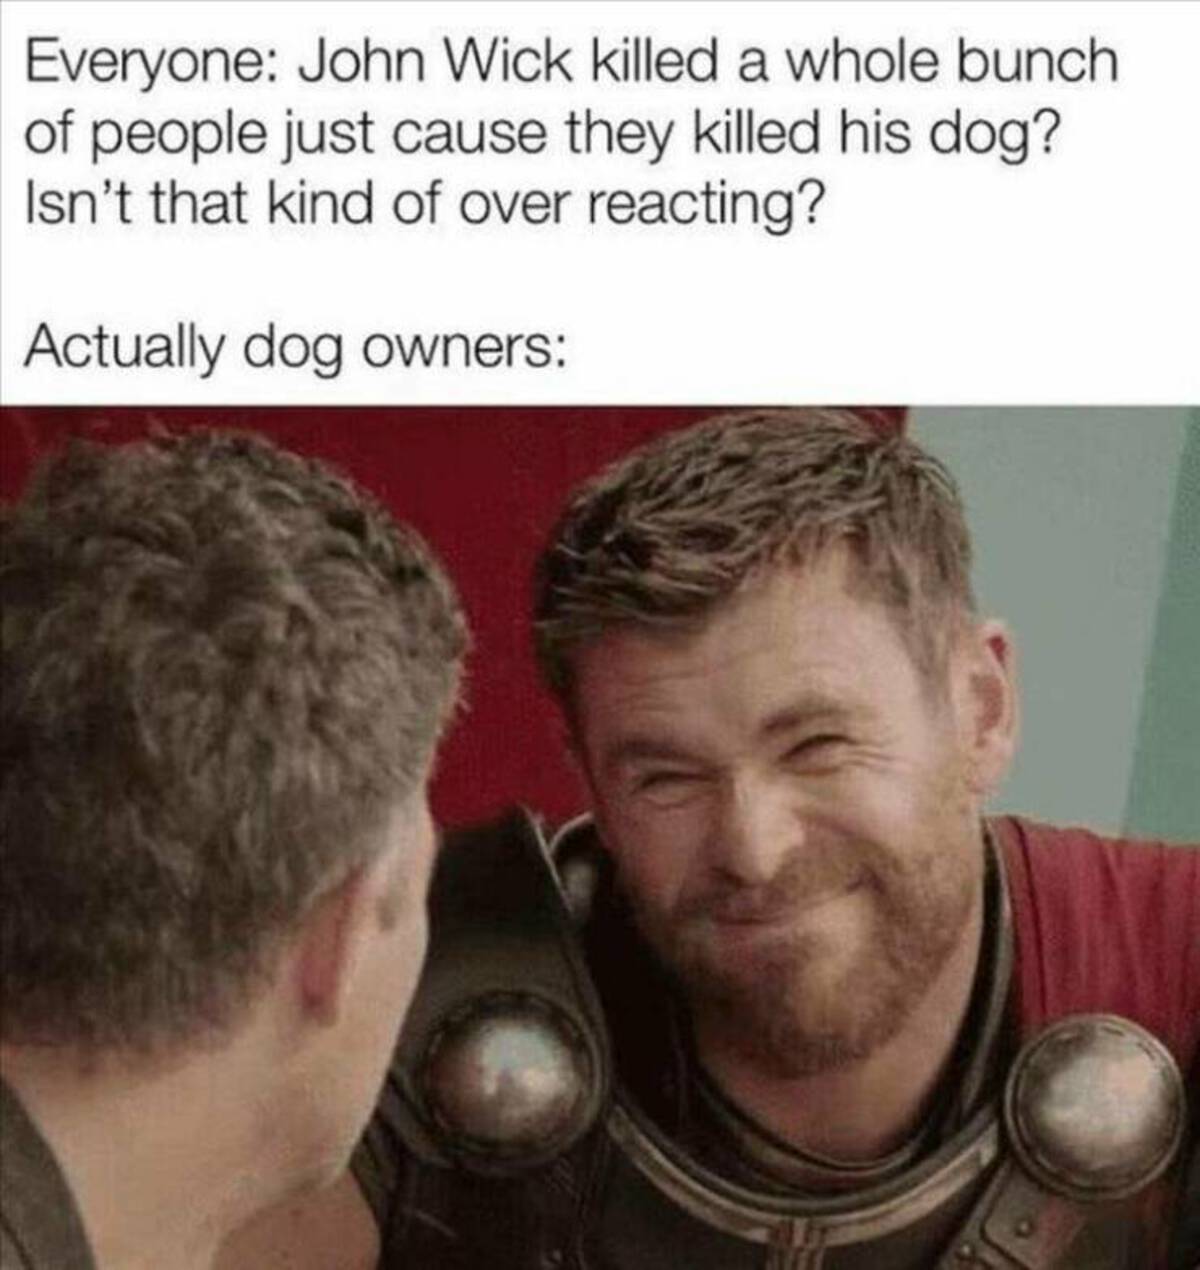 journalist memes - Everyone John Wick killed a whole bunch of people just cause they killed his dog? Isn't that kind of over reacting? Actually dog owners